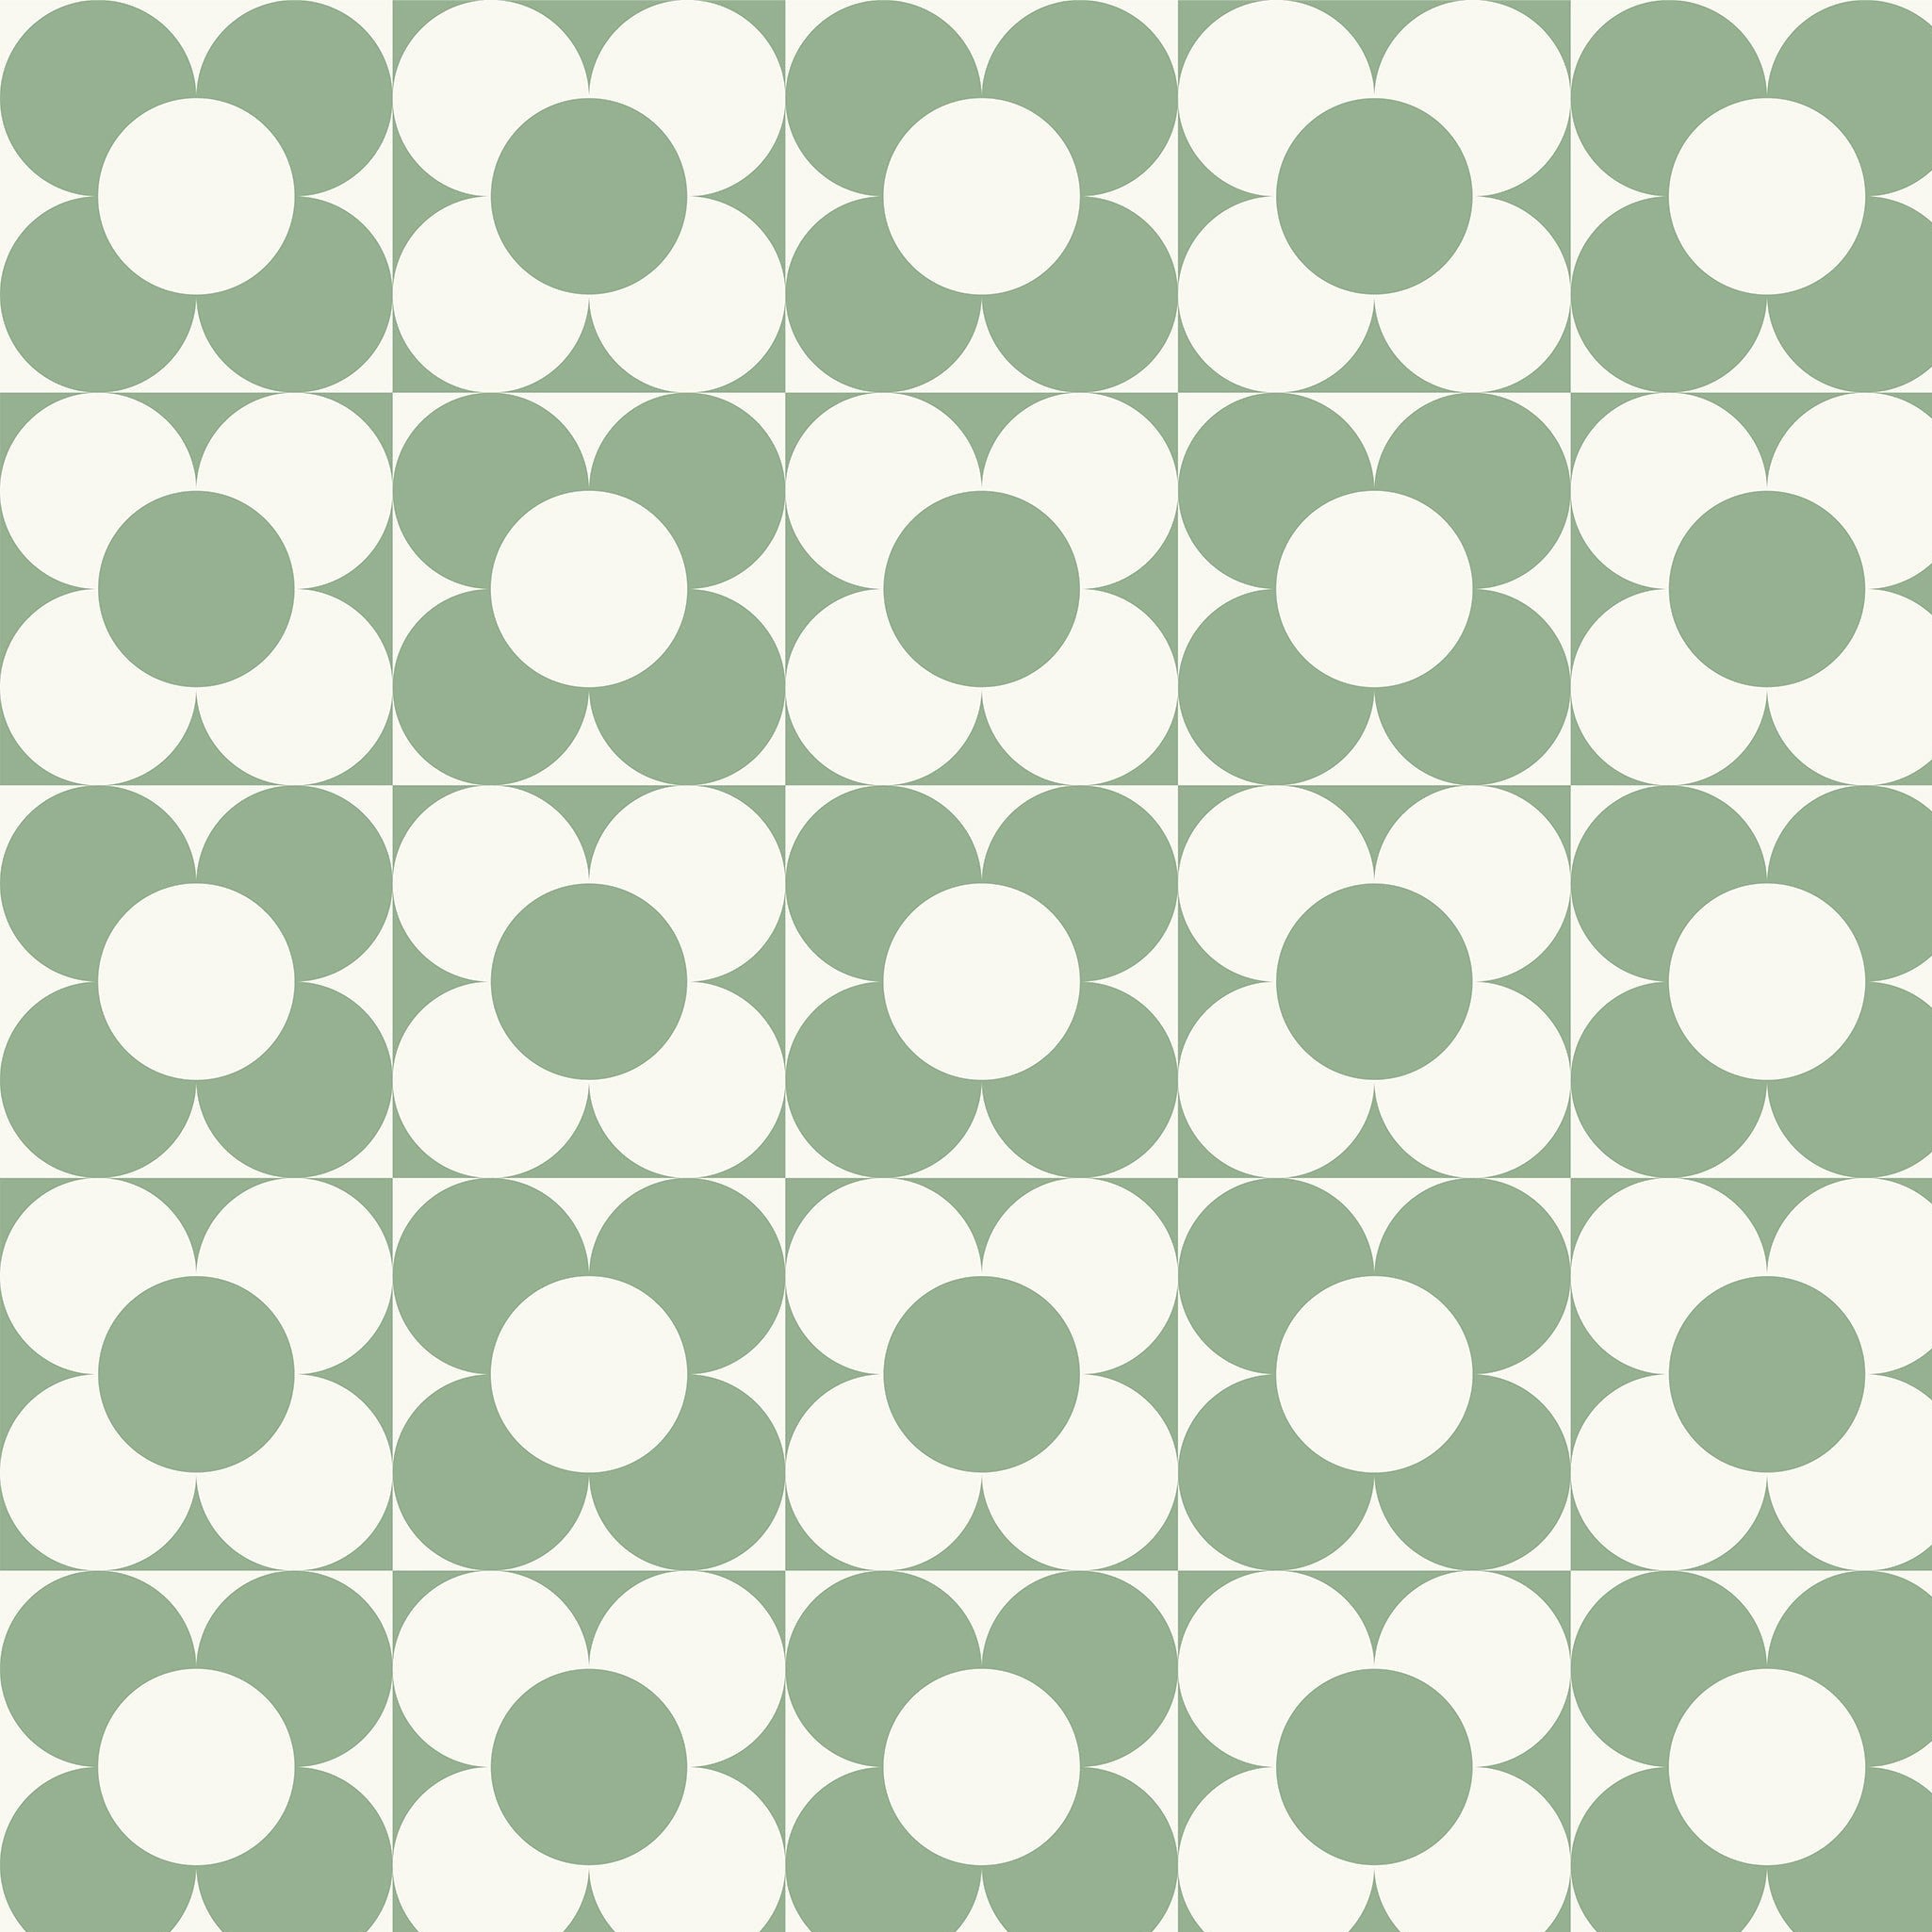 A vibrant and playful pattern of the Vintage Groovy Wallpaper in green, showcasing a repetitive geometric design with large white and green circles on a pale green background. The pattern evokes a fun and retro vibe, perfect for adding a pop of color and personality to any room